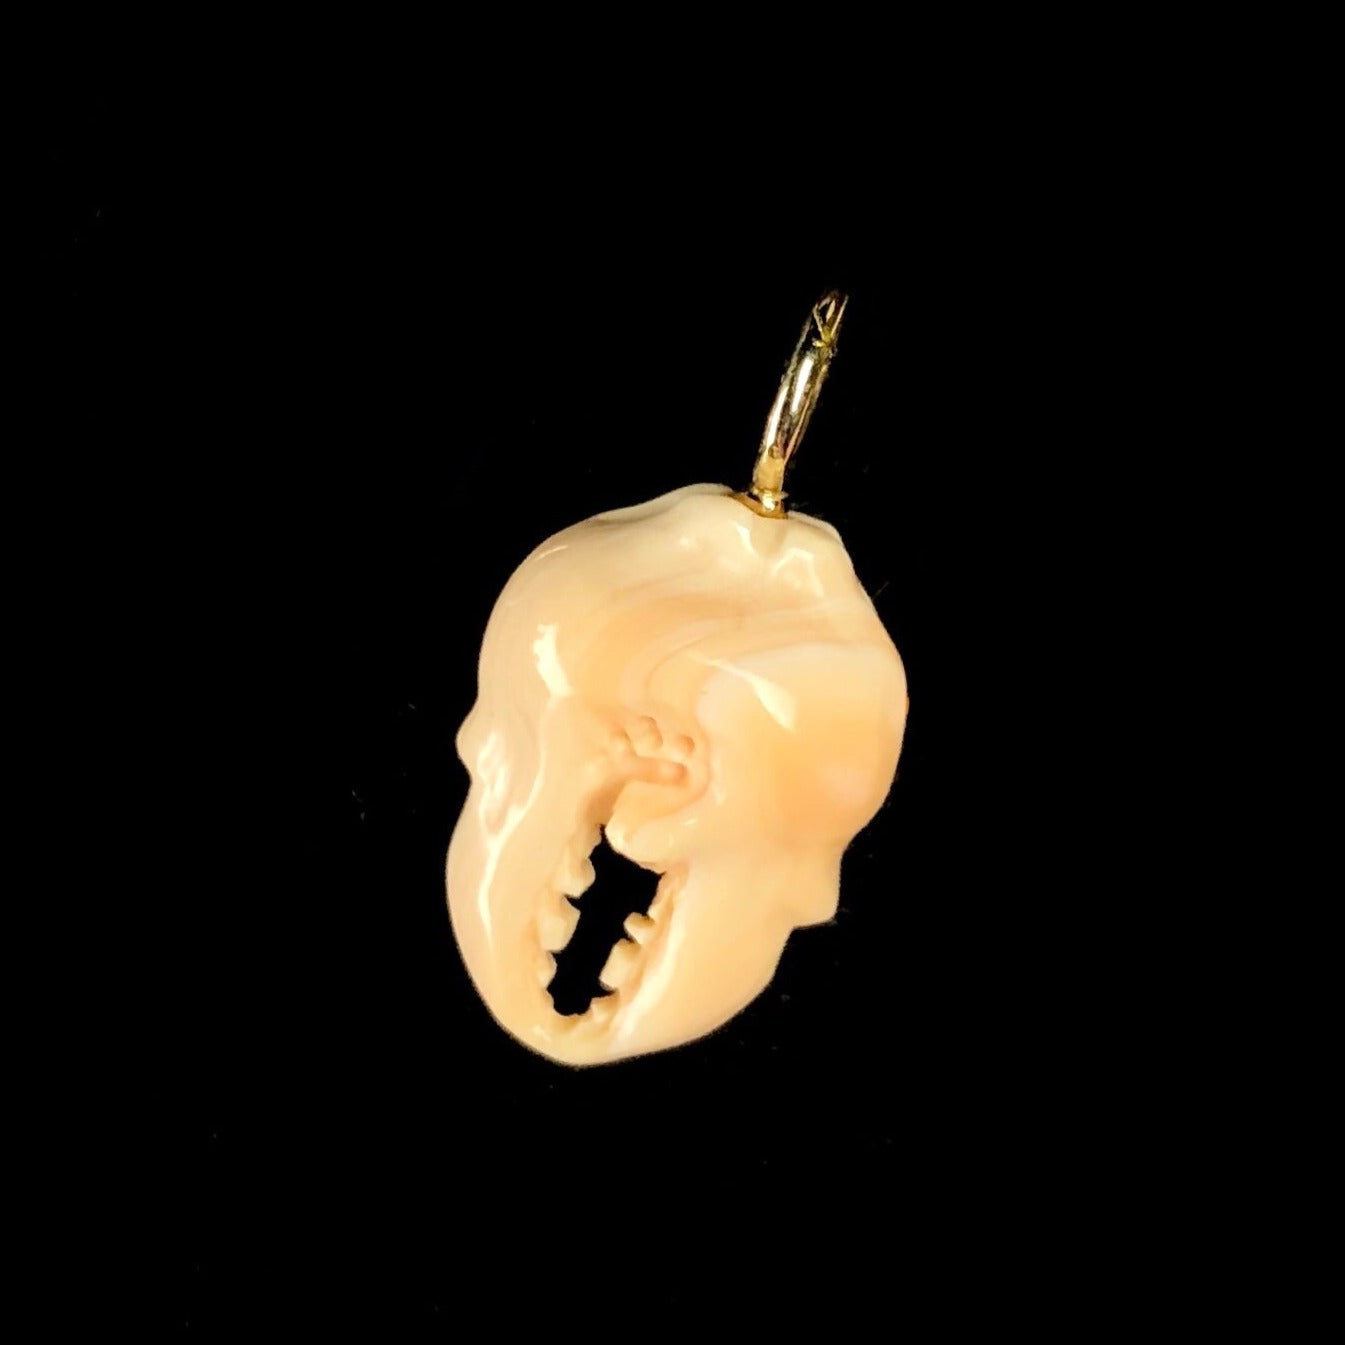 Light Orange colored Conch Crab Claw Charm with gold bail